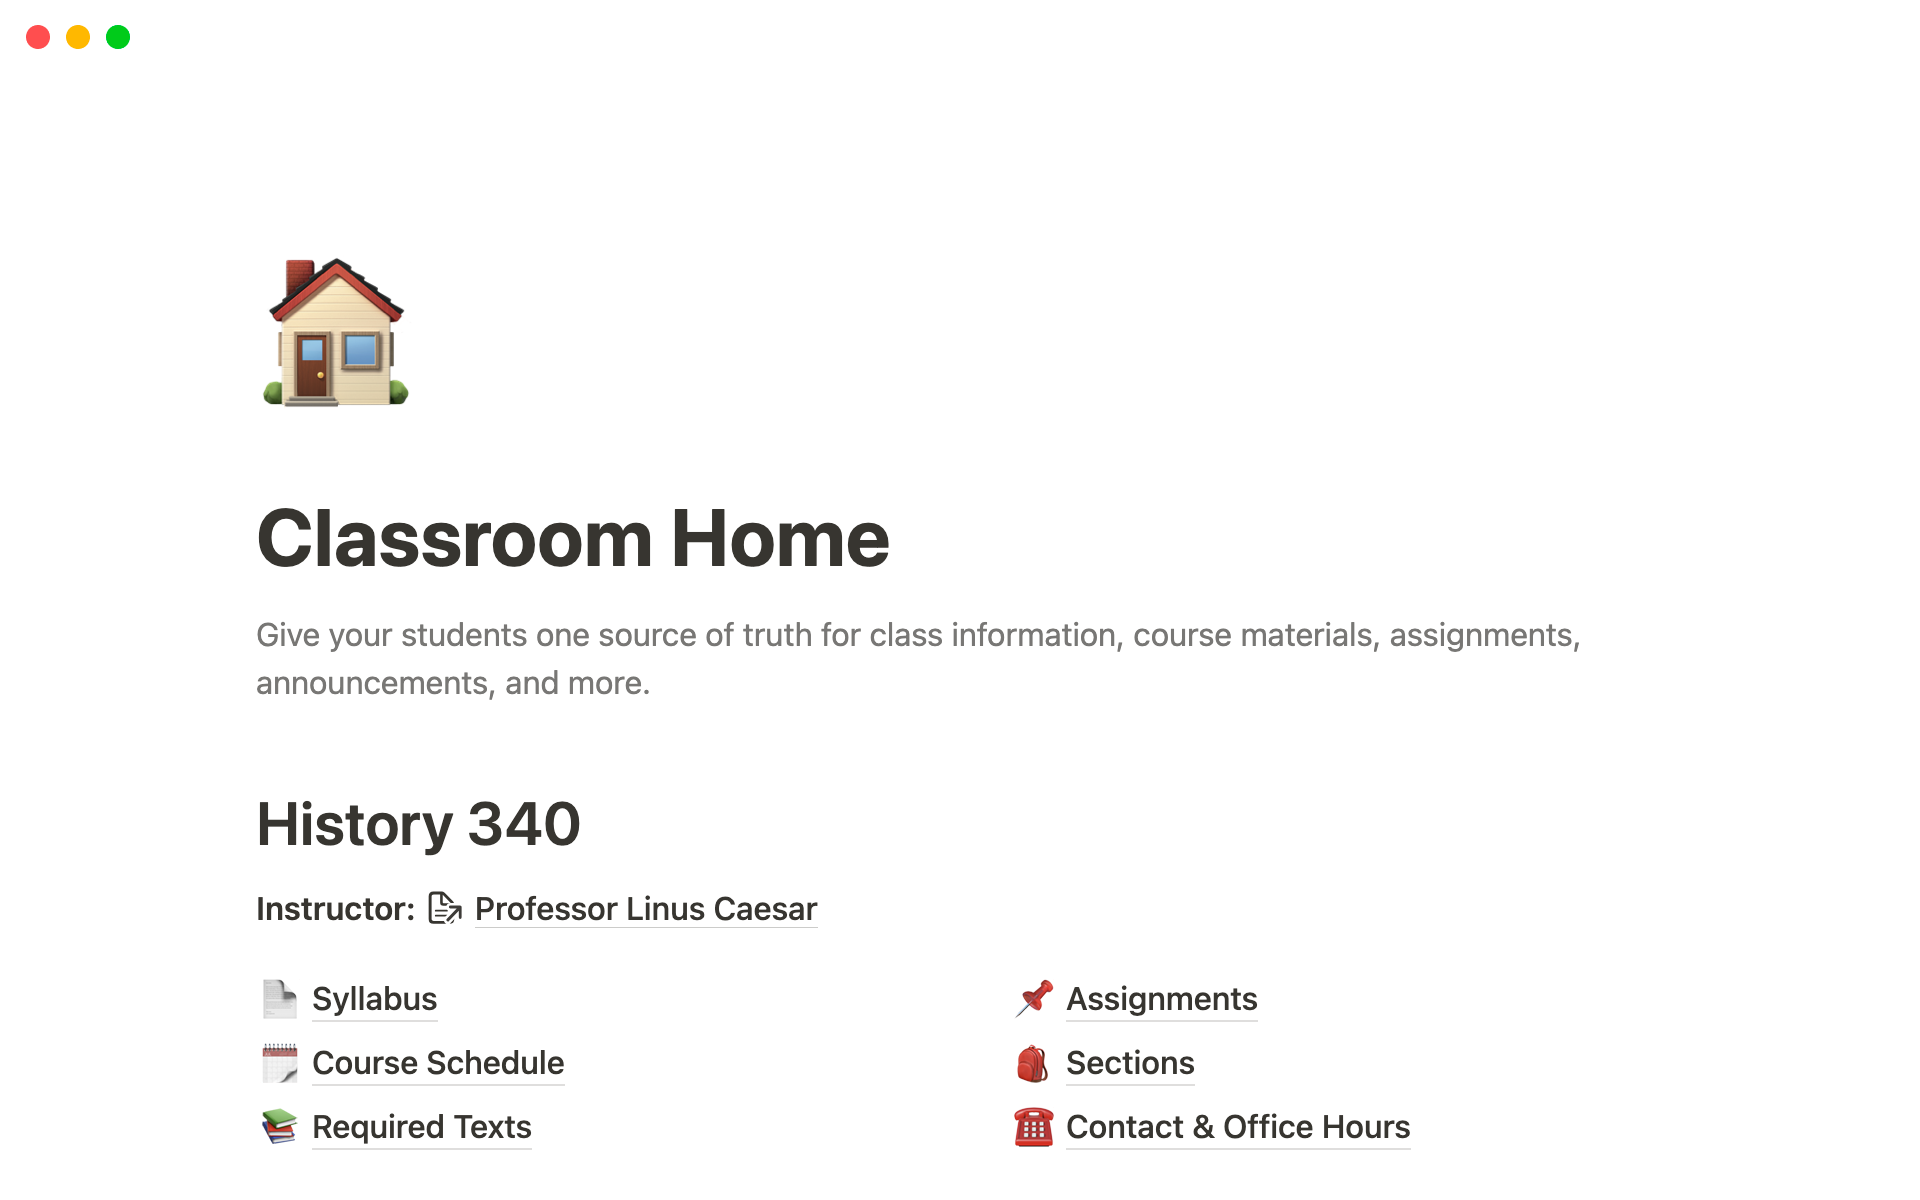 The desktop image for the Classroom home template